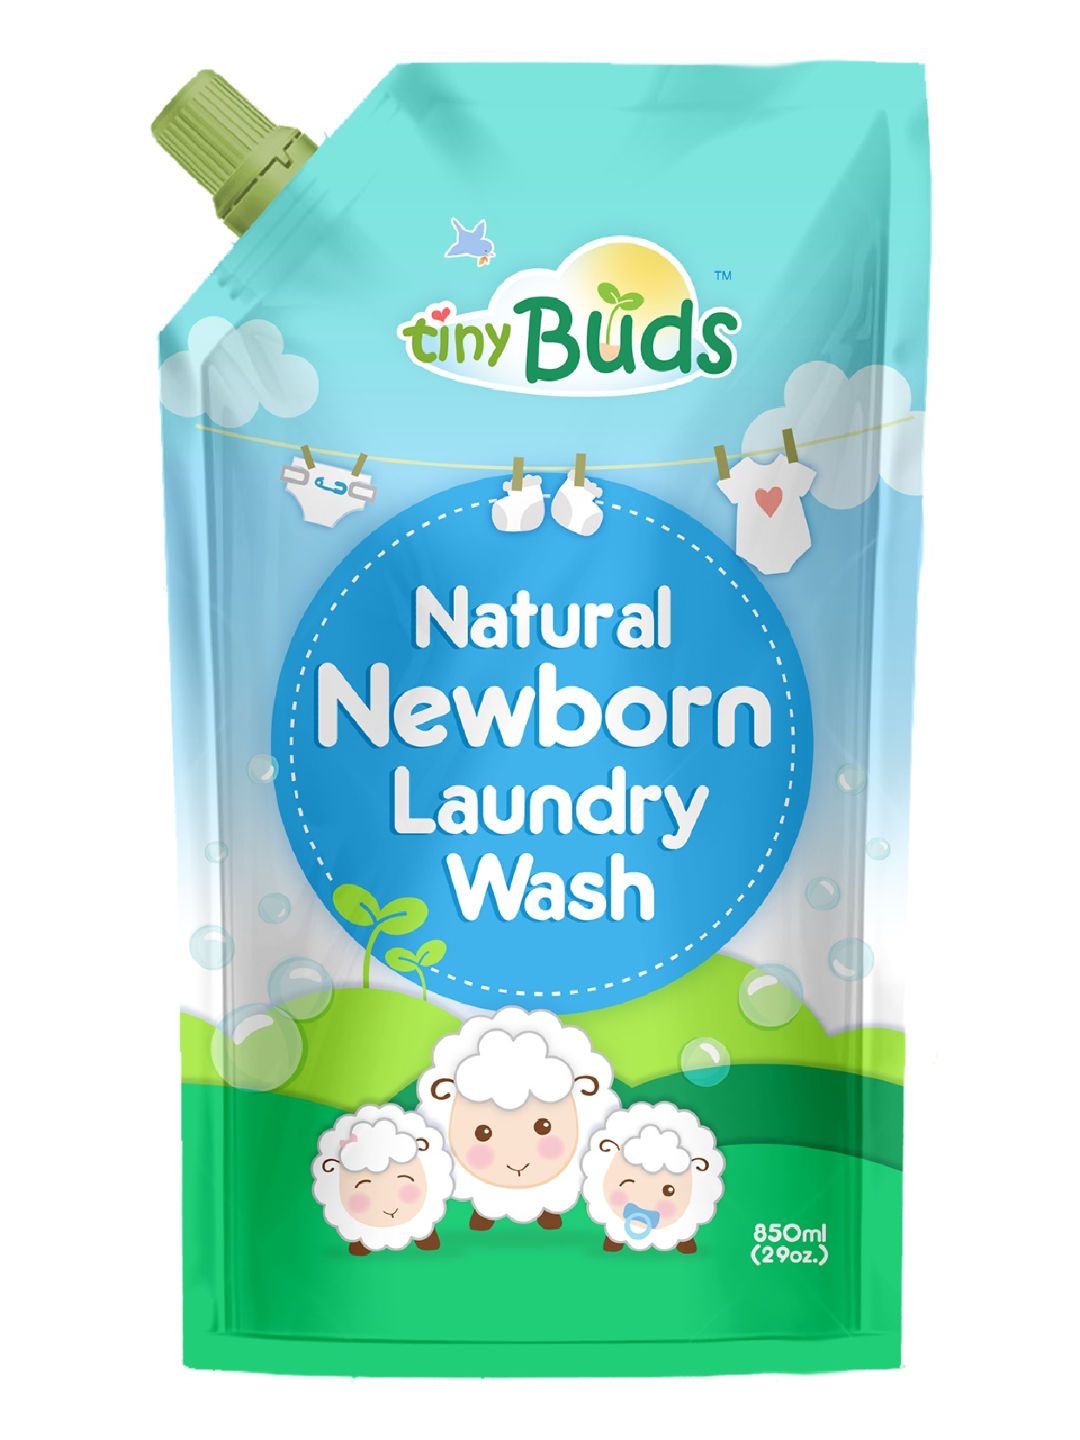 Tiny Buds Natural Newborn Liquid Laundry Wash for Babies Pouch (850ml)